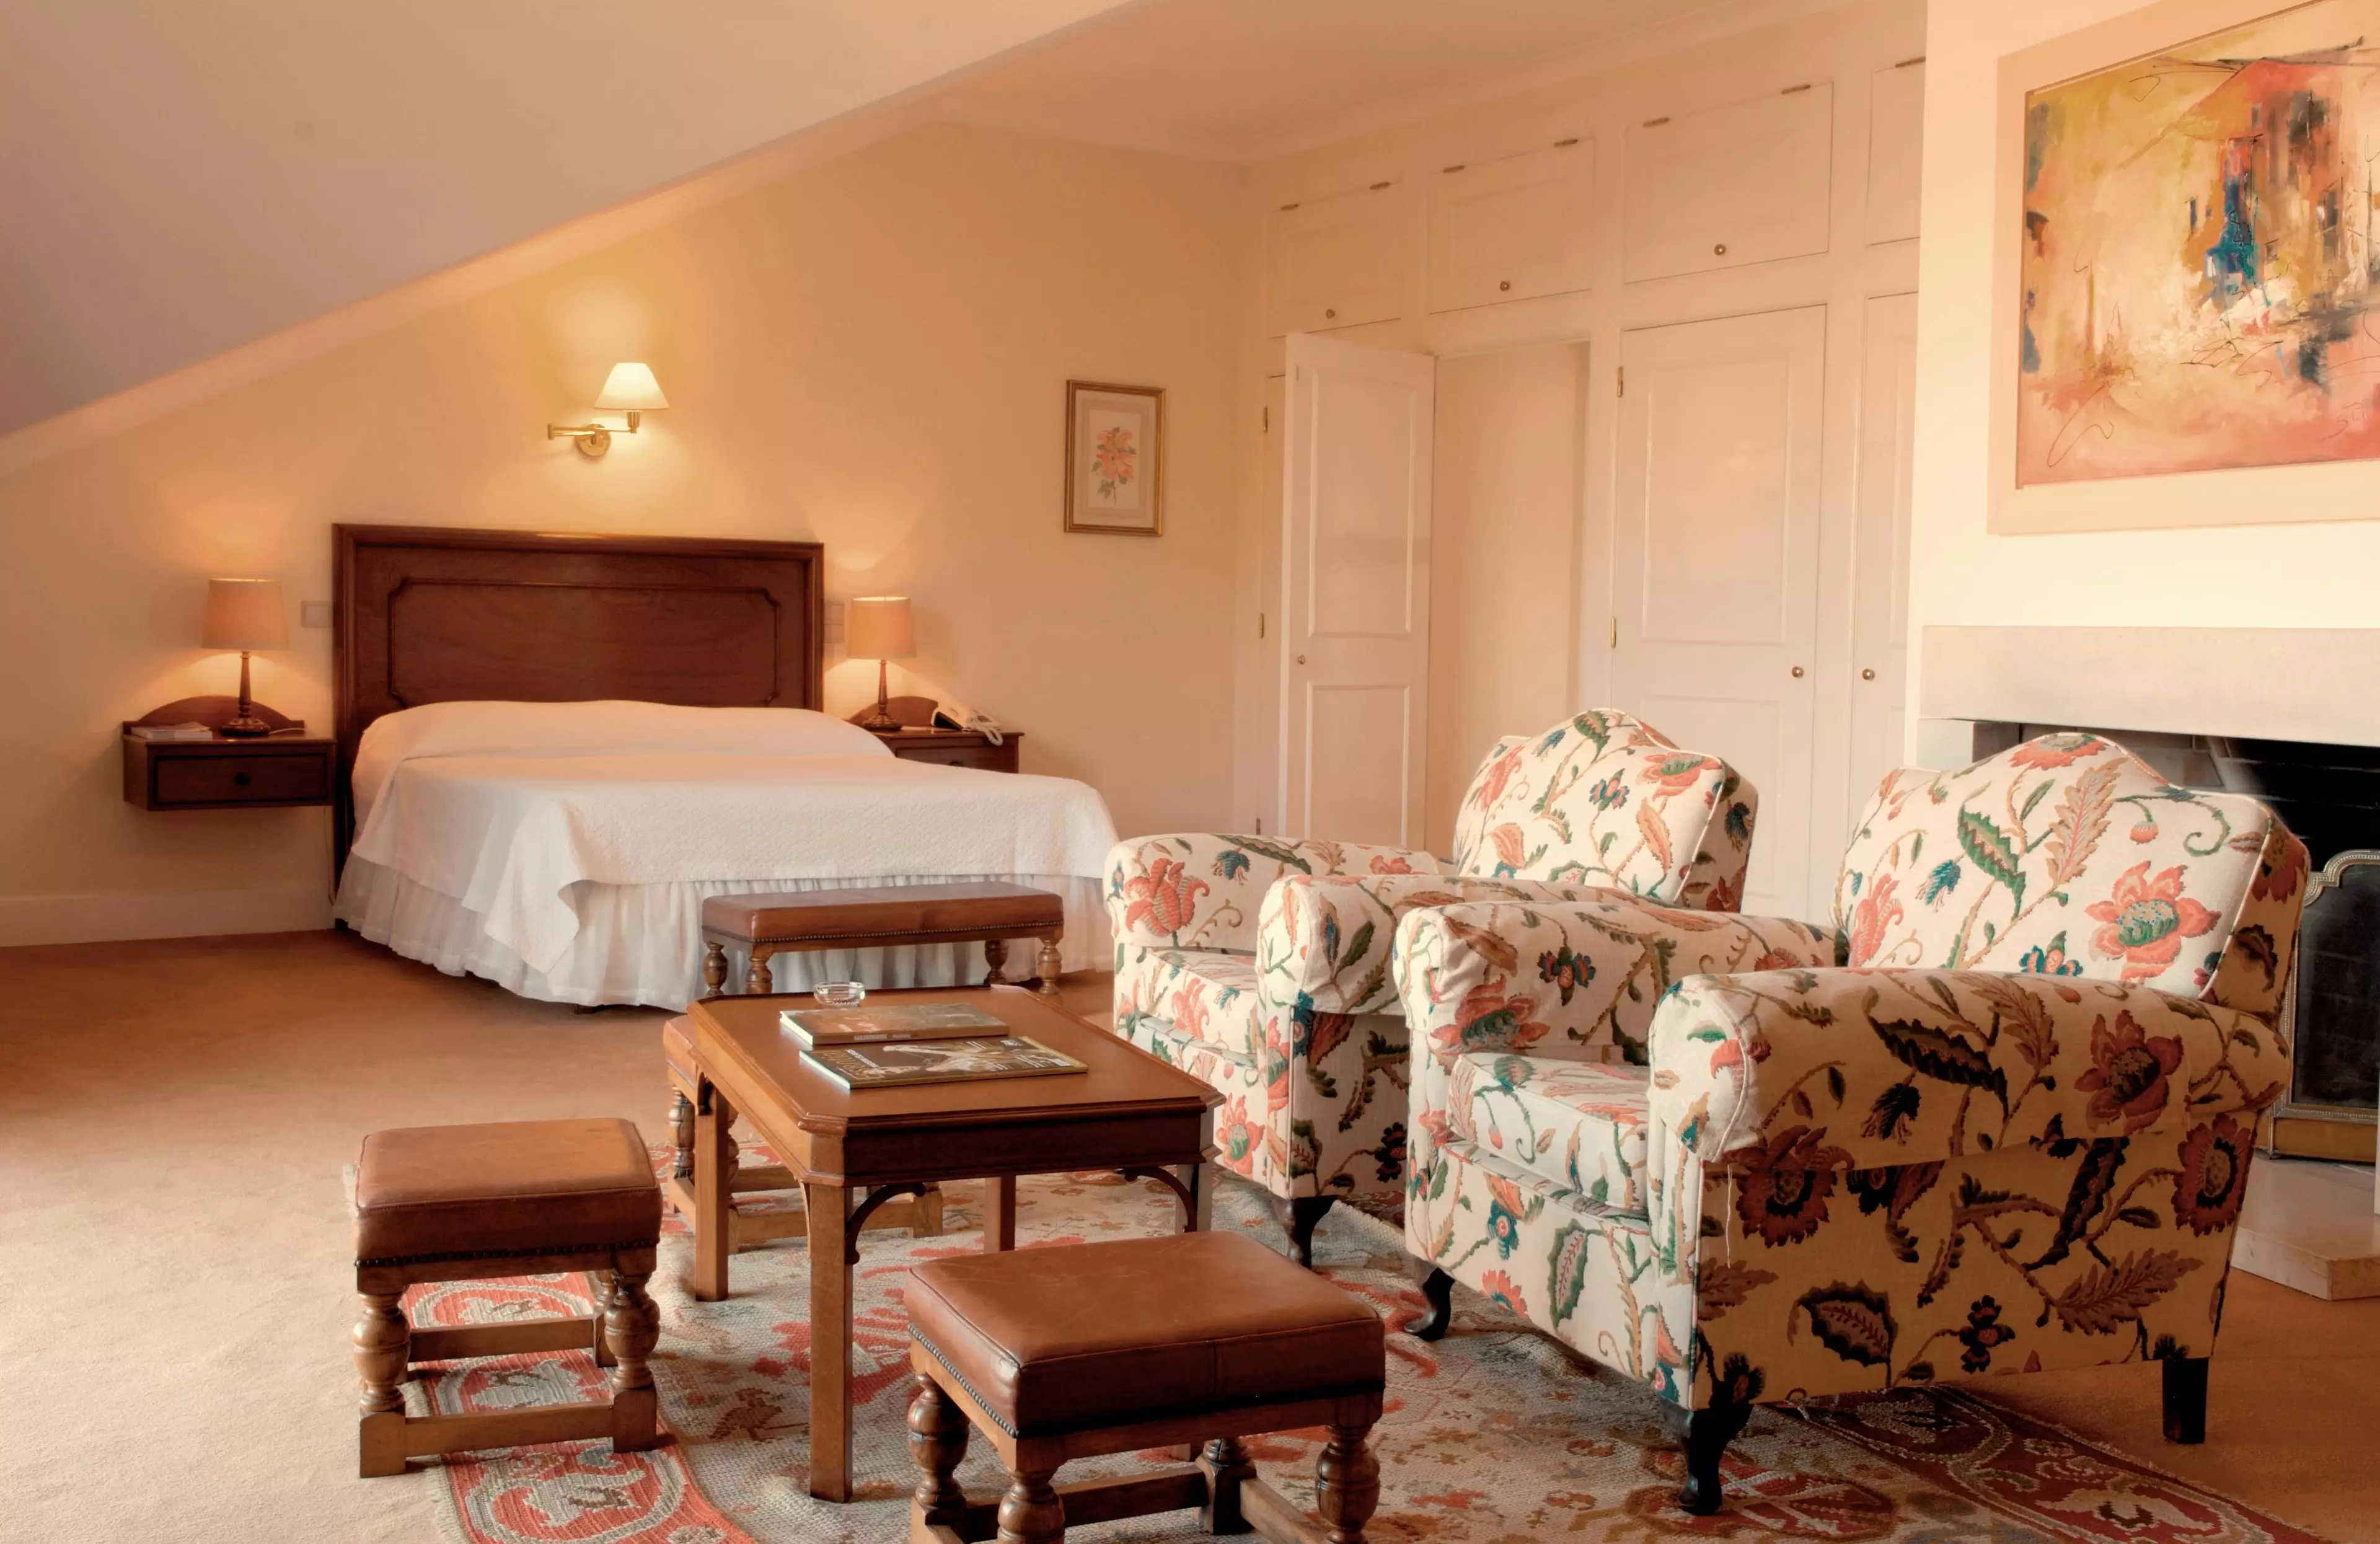 A suite in the award-winning boutique hotel.